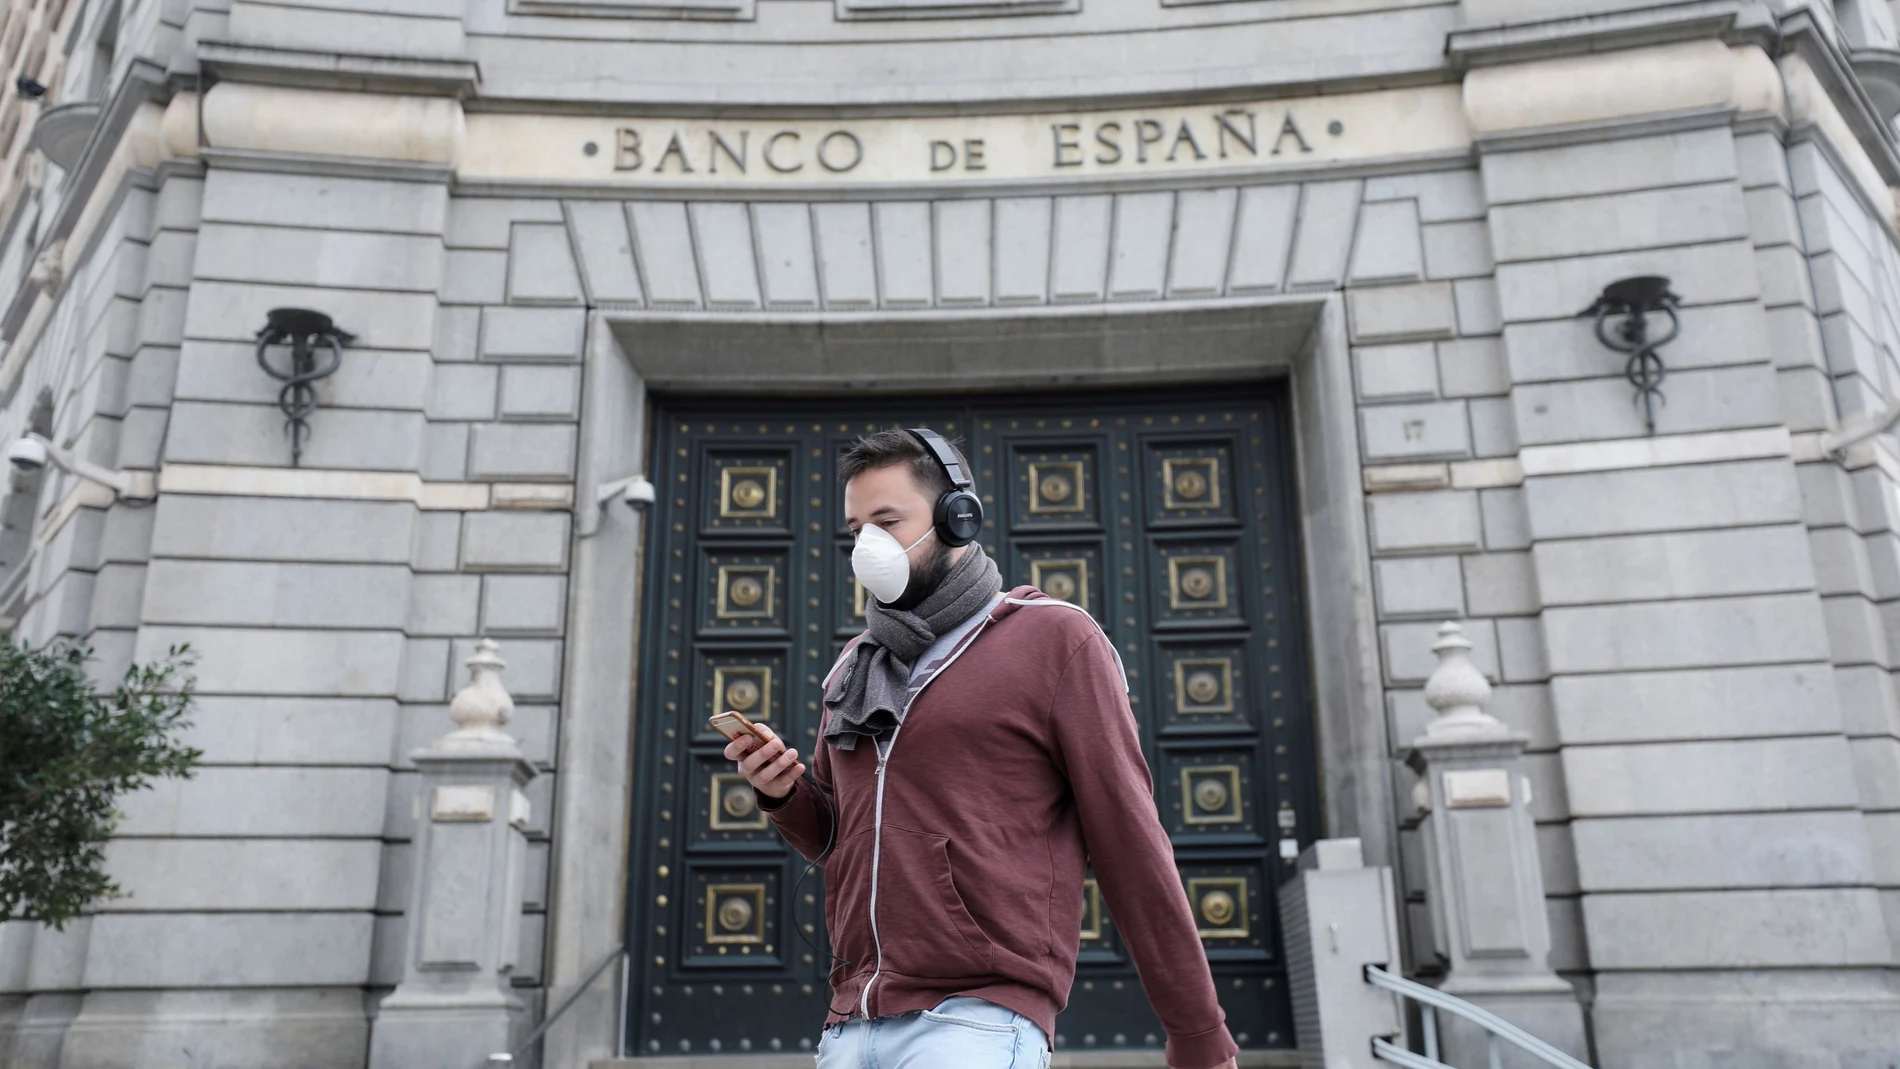 FILE PHOTO: A man wears a protective face mask as he walks past Banco de Espana (Bank of Spain), amidst concerns over coronavirus outbreak, in Barcelona